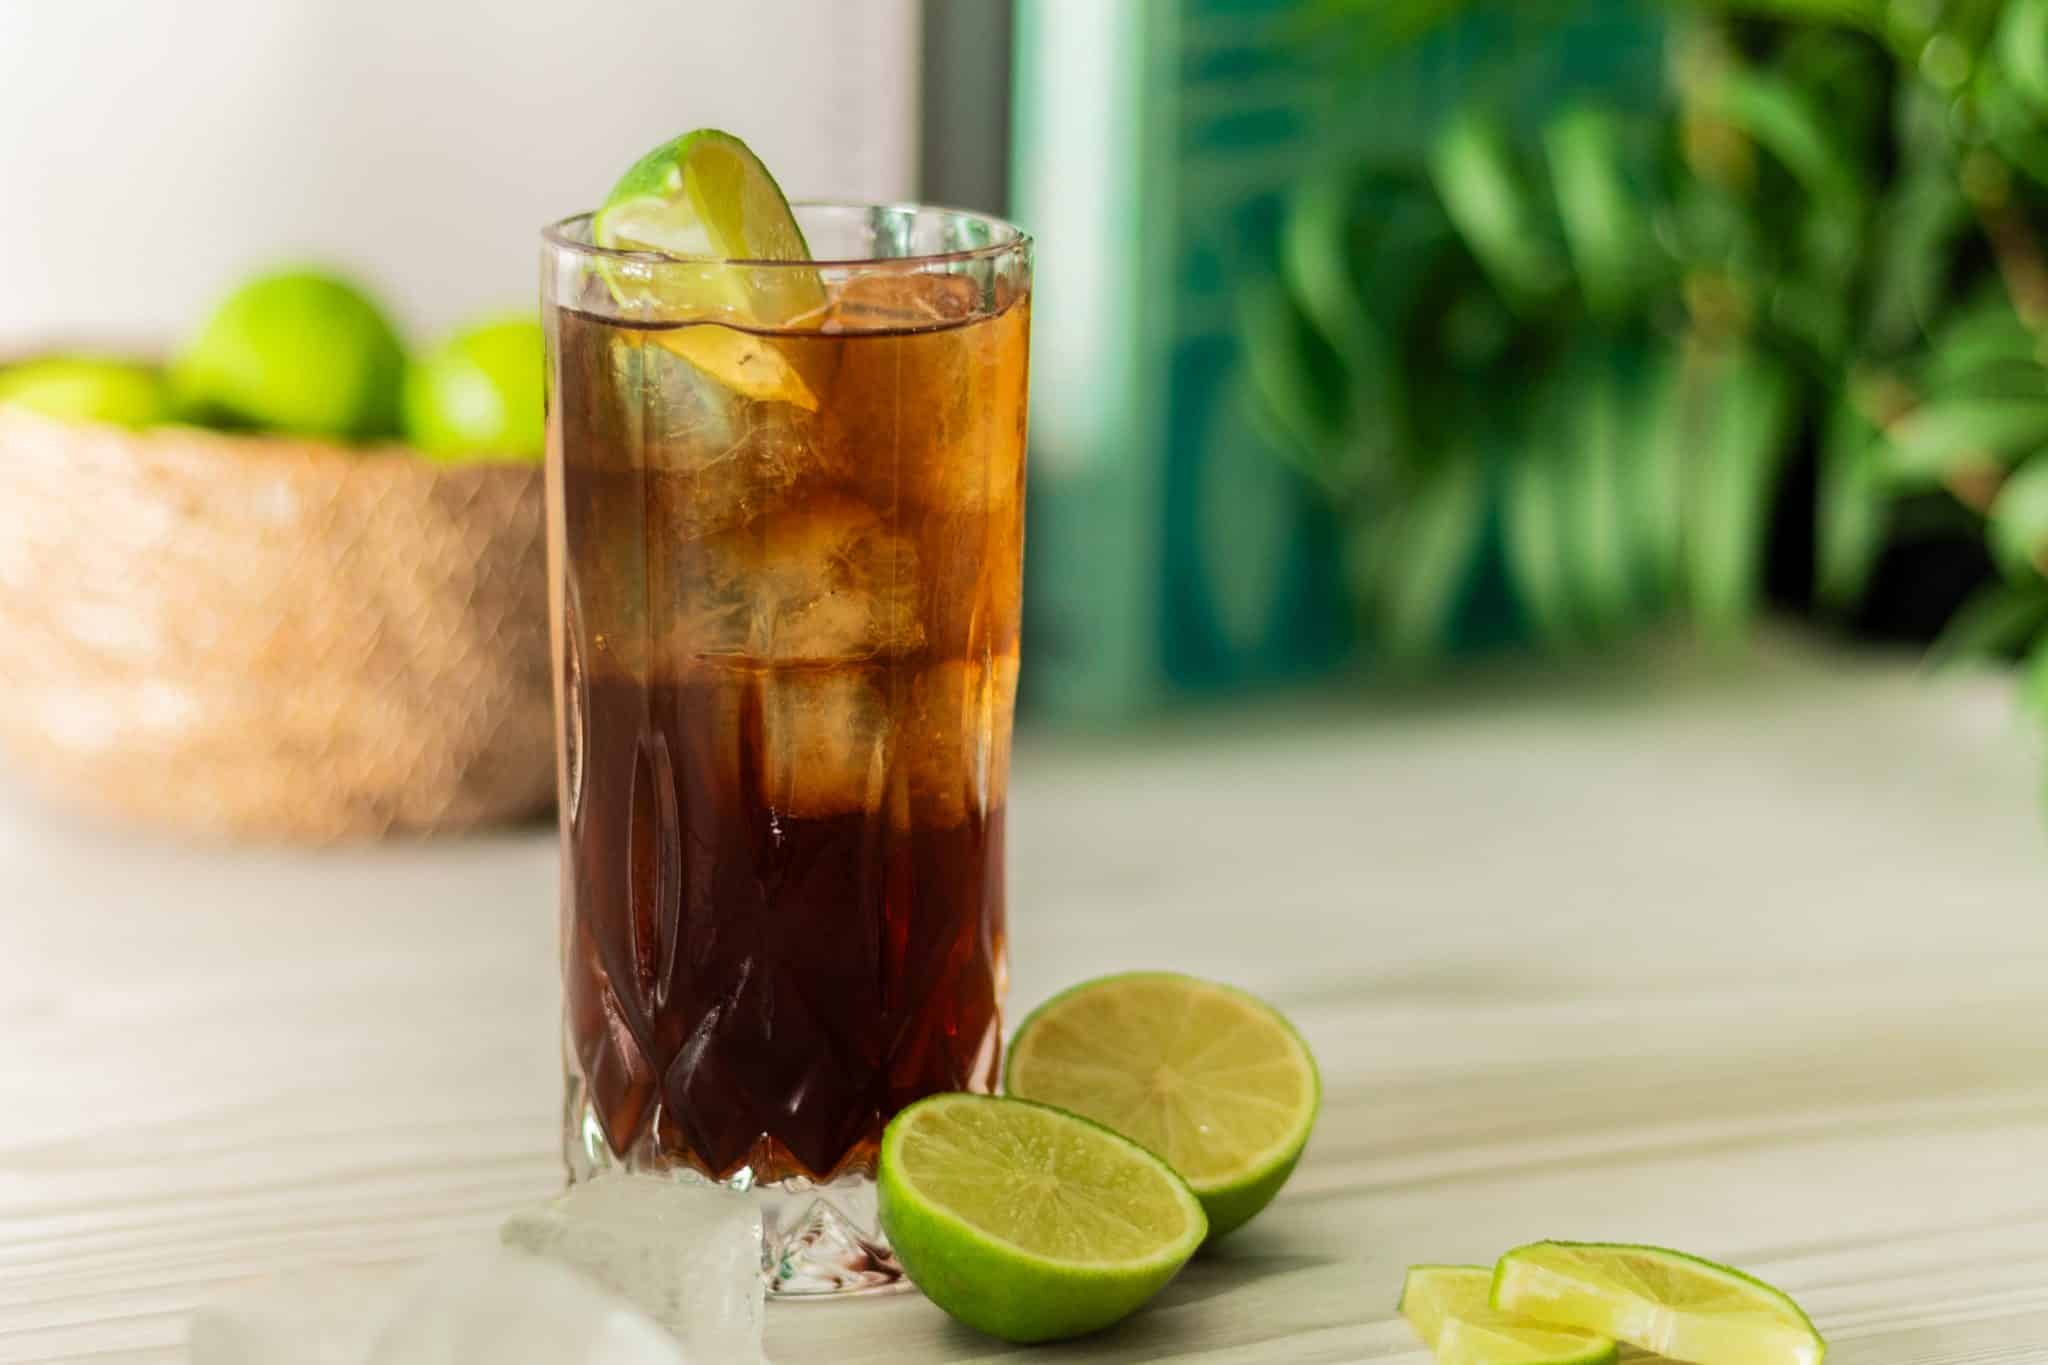 A side shot of a Cuba Libre cocktail in a highball glass with two half limes on the side and a basket with limes on the background.